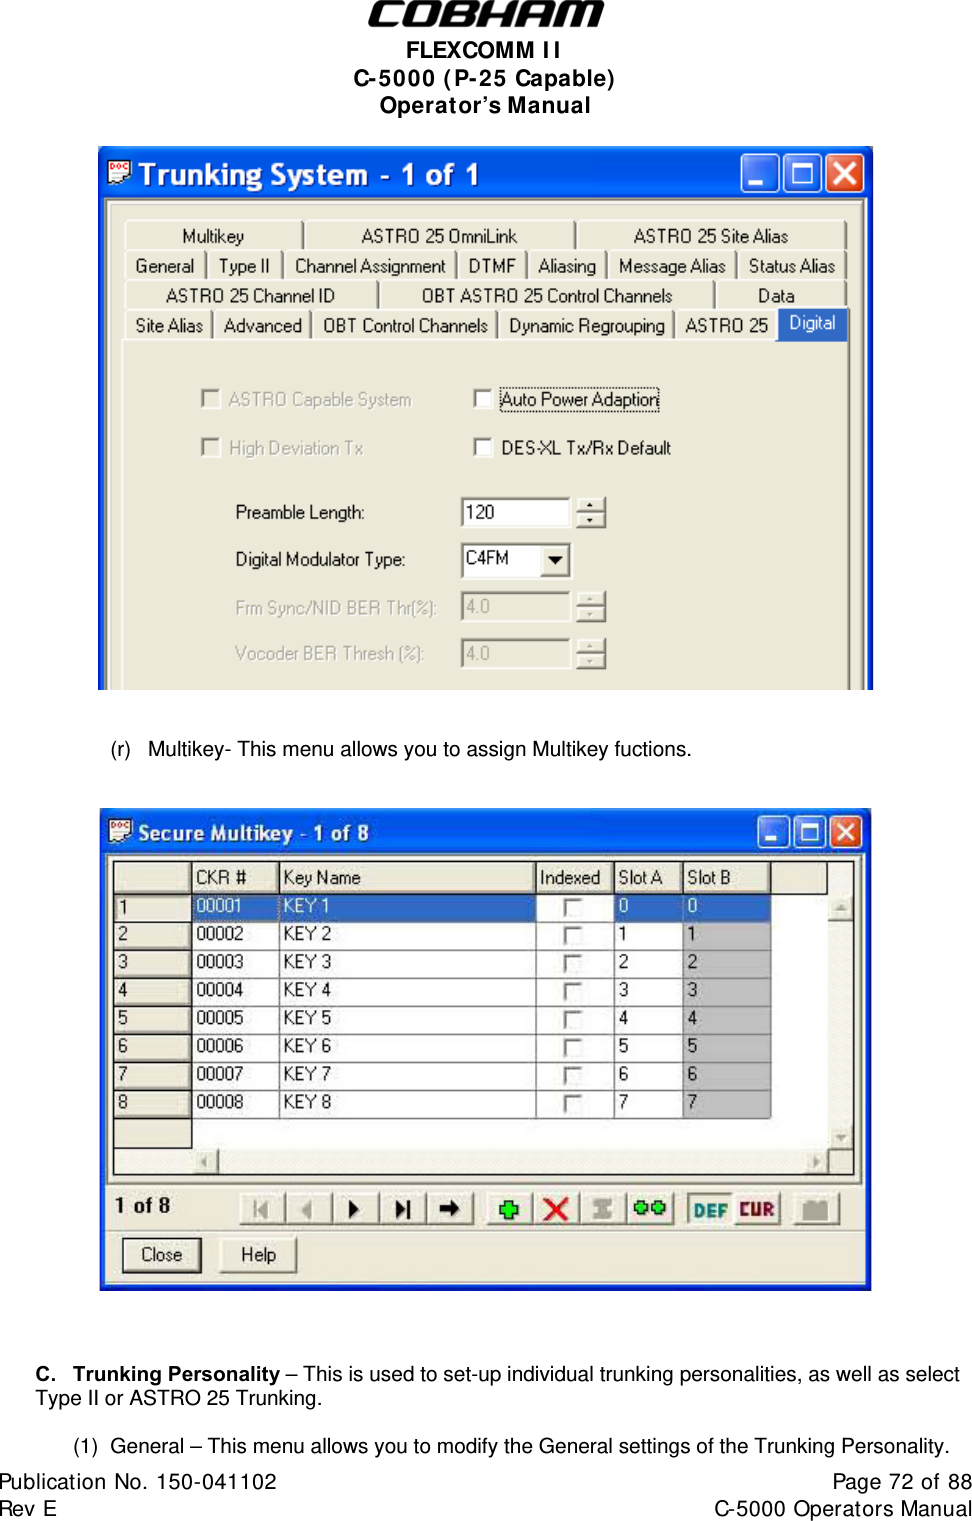  FLEXCOMM II C-5000 (P-25 Capable) Operator’s Manual    (r)  Multikey- This menu allows you to assign Multikey fuctions.         C. Trunking Personality – This is used to set-up individual trunking personalities, as well as select Type II or ASTRO 25 Trunking.  (1)  General – This menu allows you to modify the General settings of the Trunking Personality. Publication No. 150-041102  Page 72 of 88  Rev E  C-5000 Operators Manual    